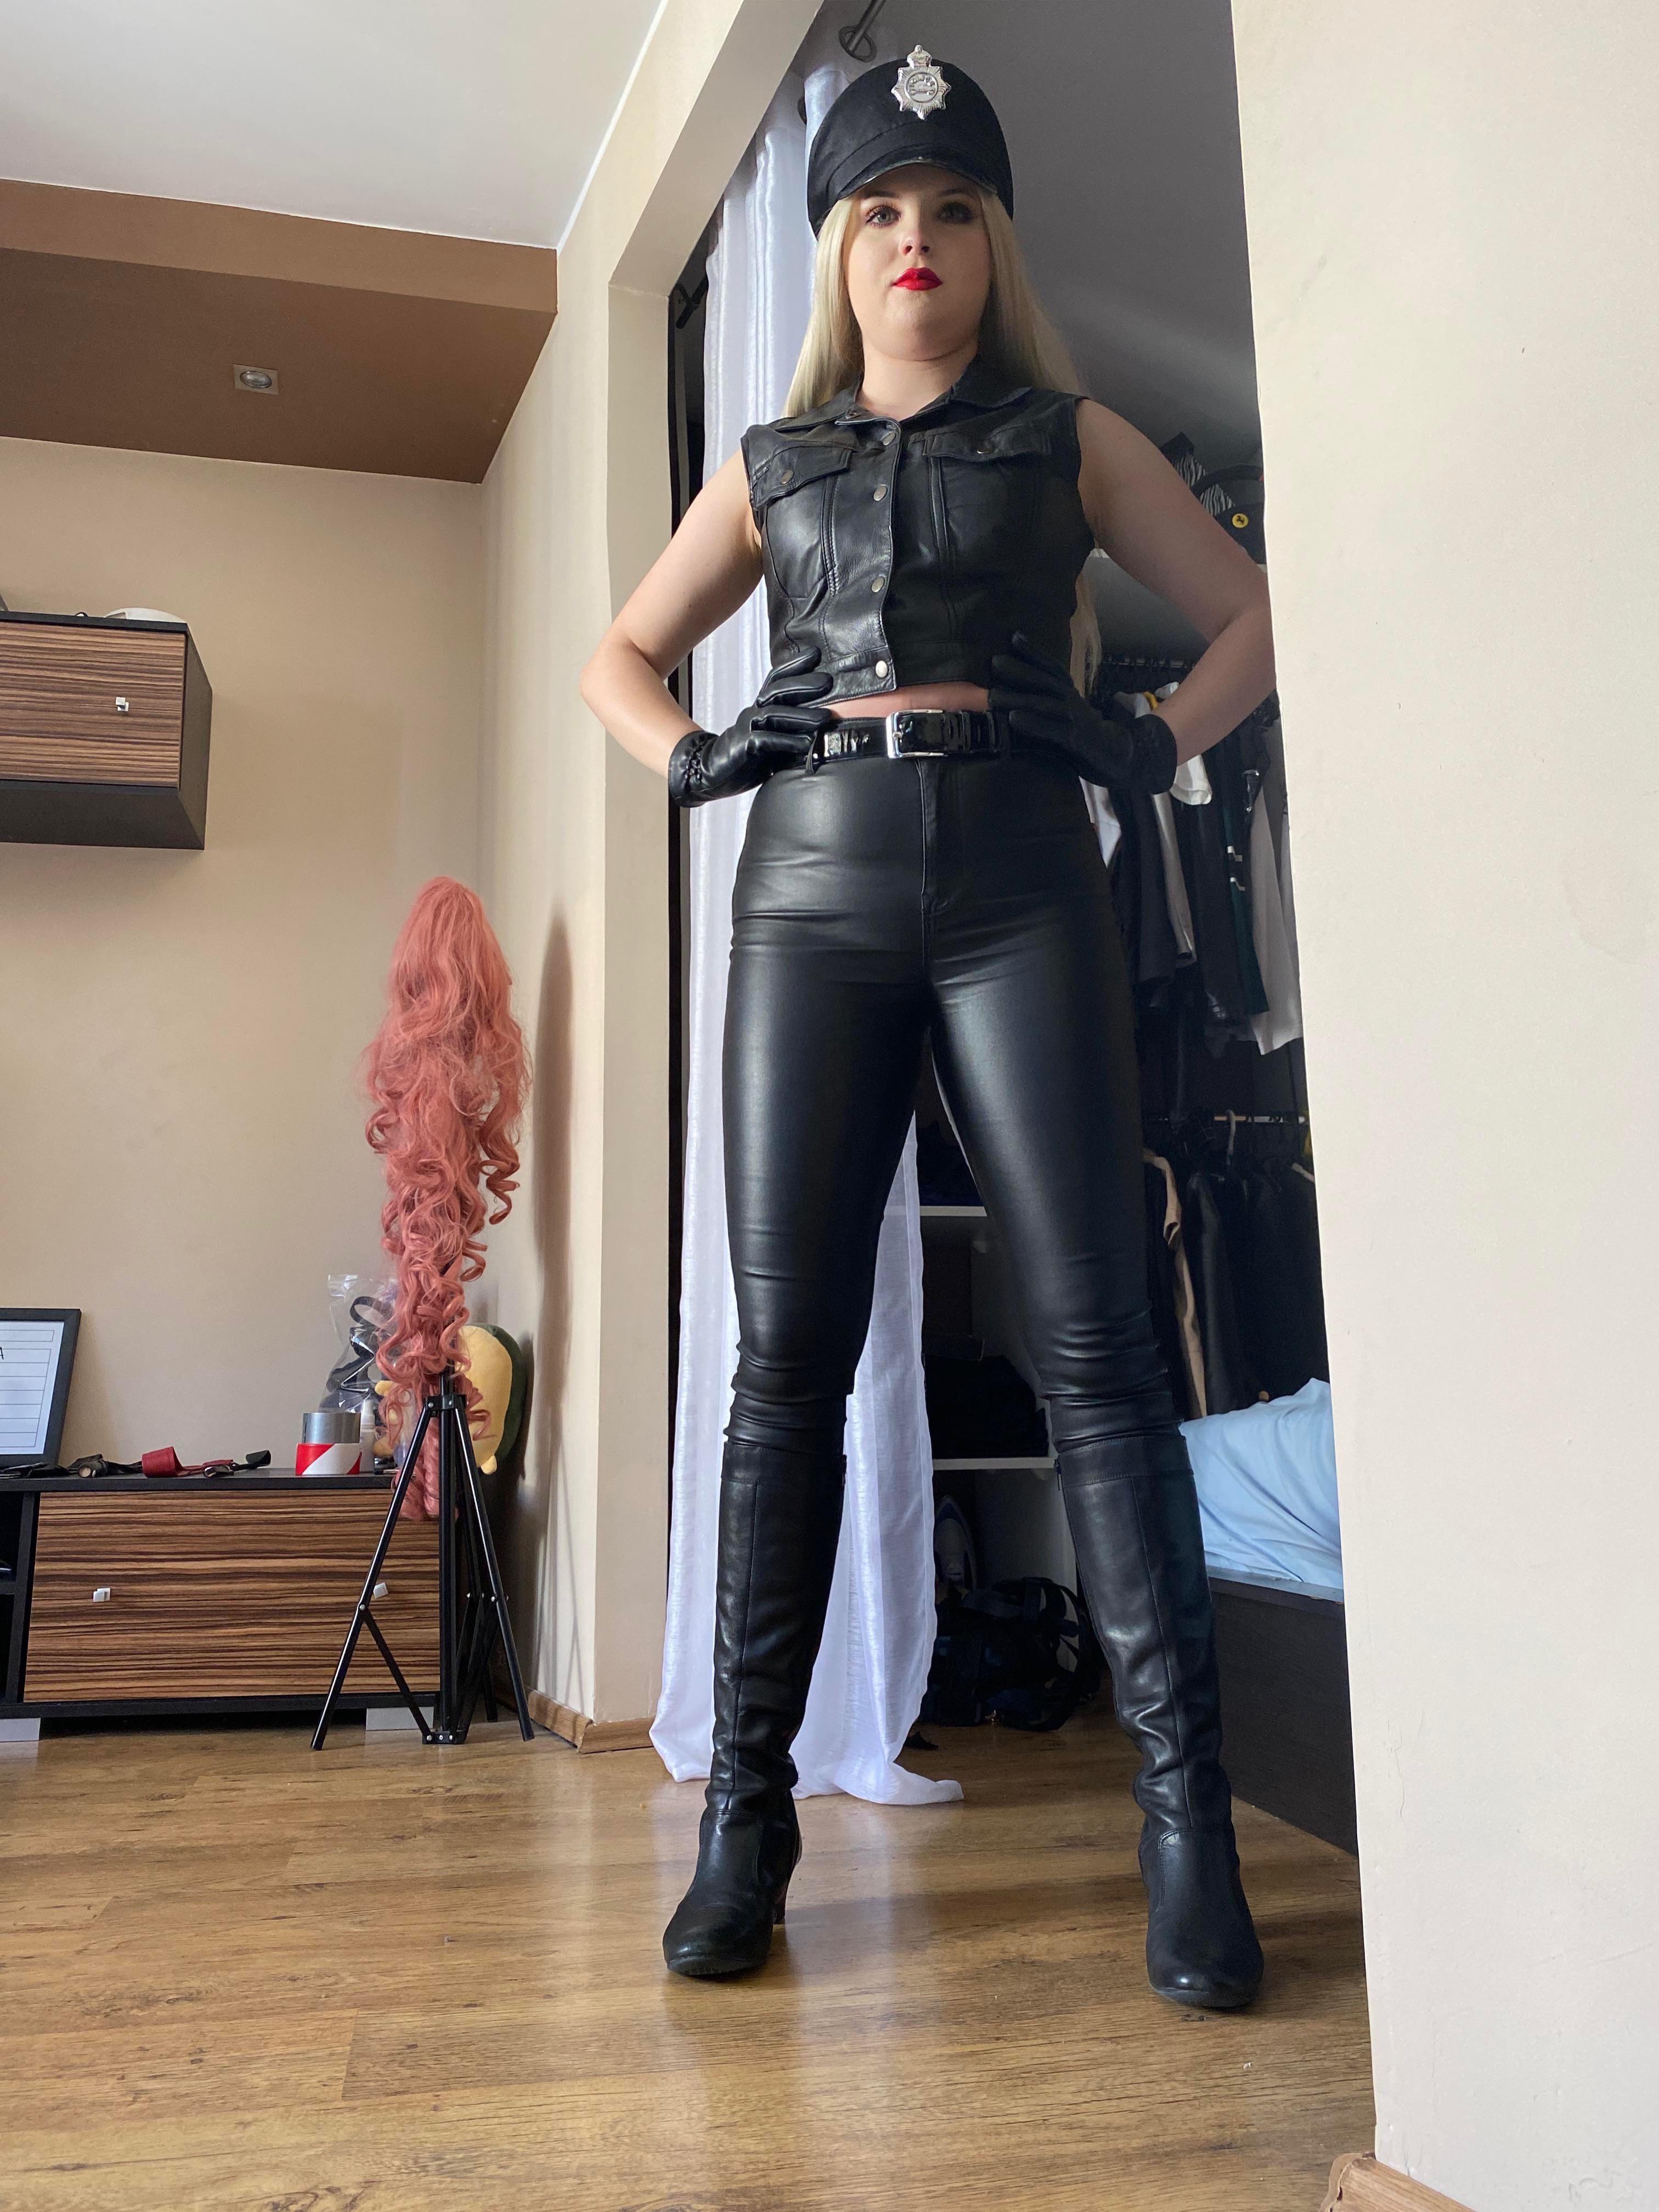 My Shiny Leather Outfit 😘